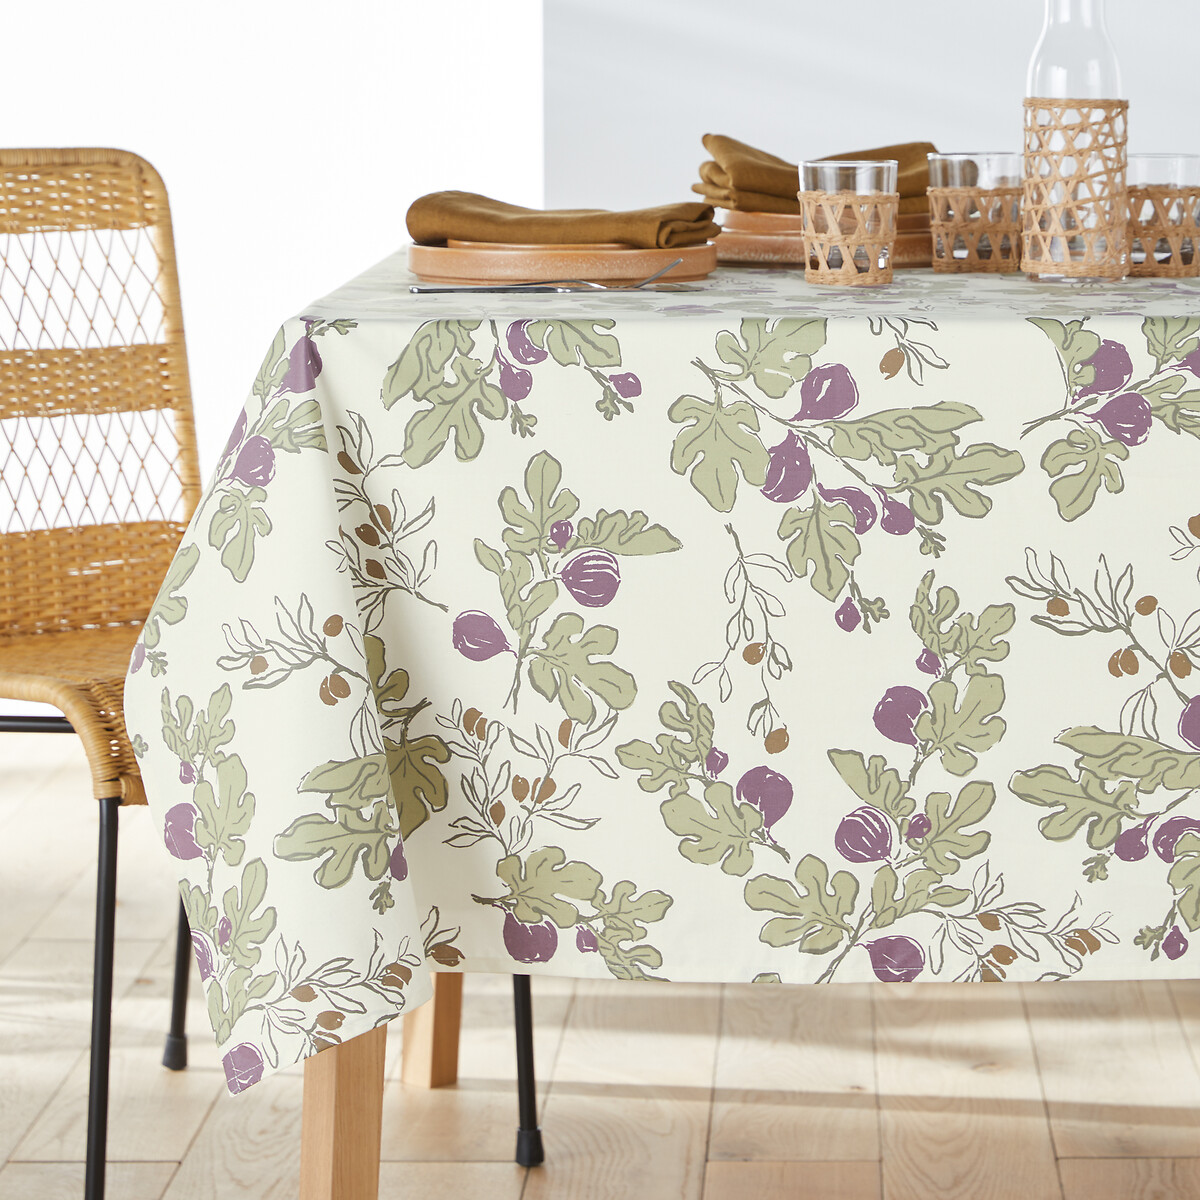 Dogliani Fig Print 100% Soft Touch Coated Cotton Tablecloth